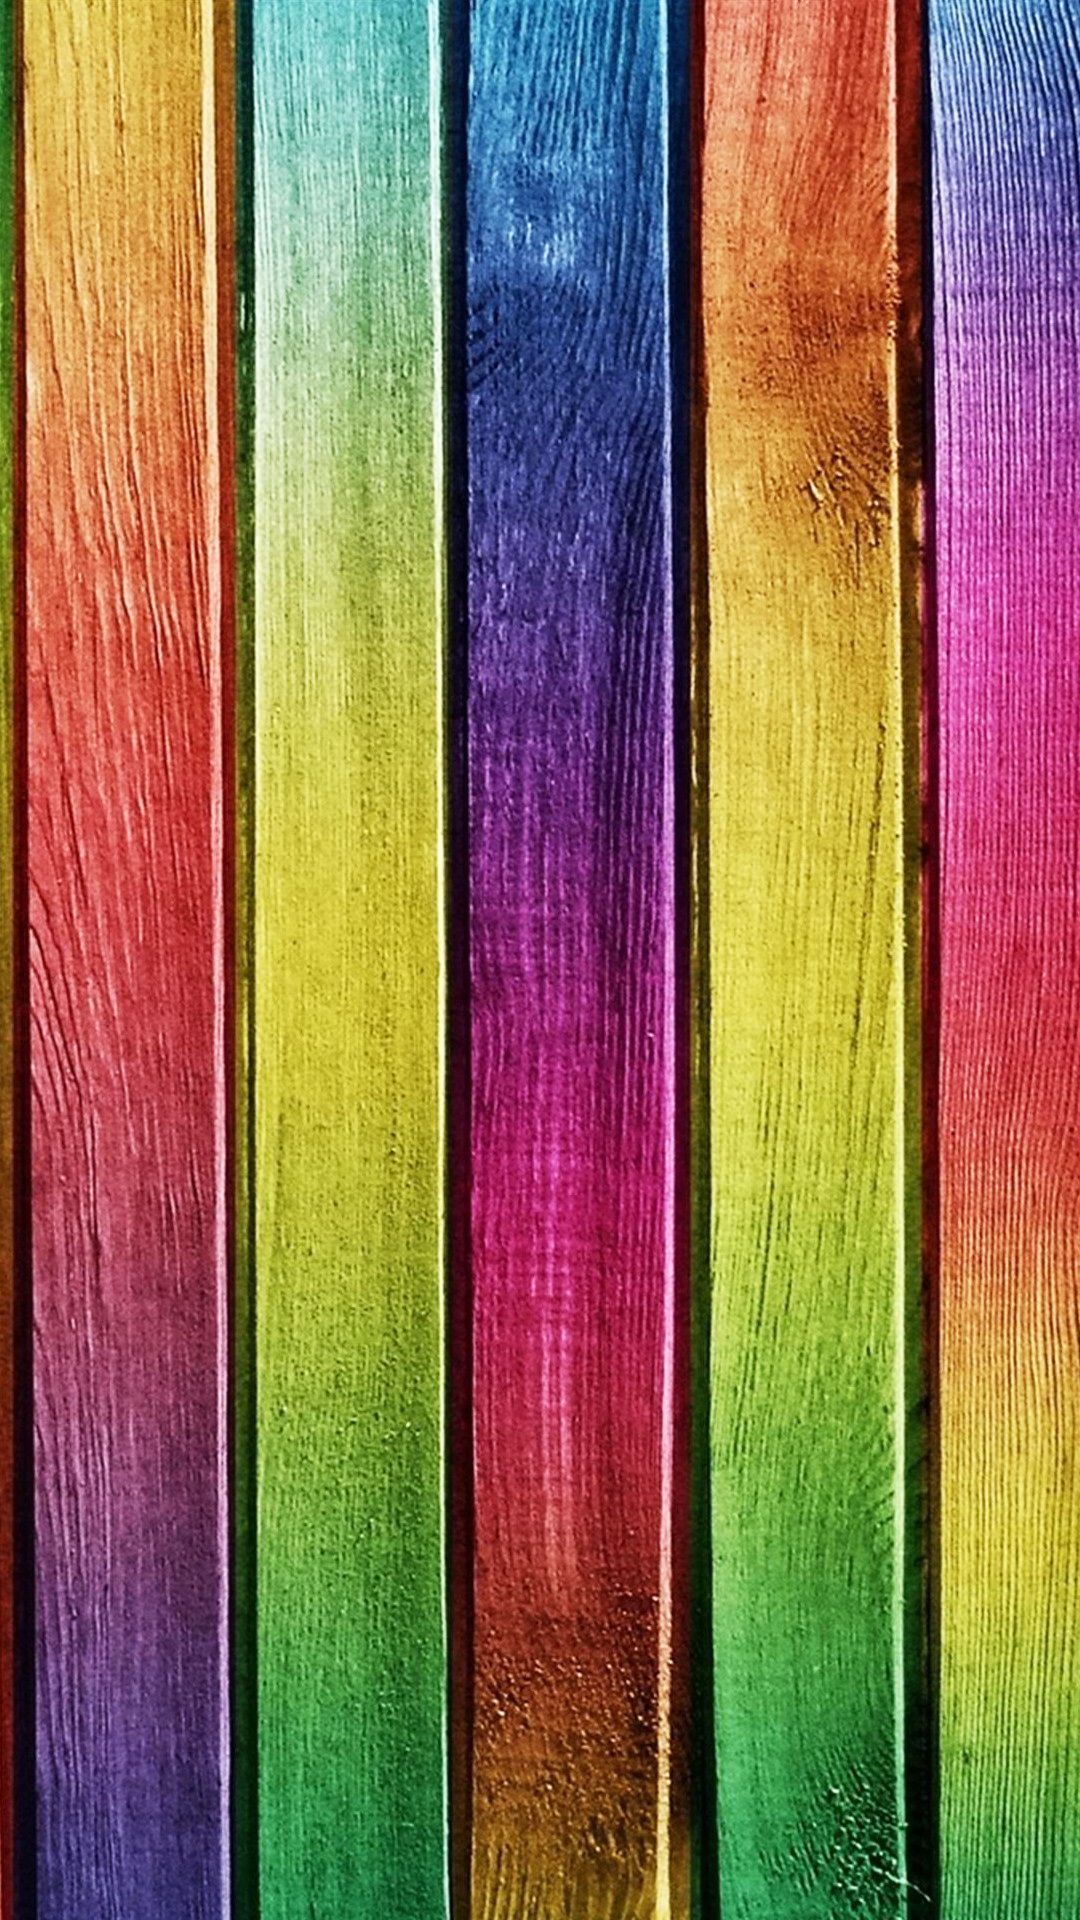 Rainbow Color Wood Planks Background. Android Wallpaper. iPhone 5s wallpaper, iPhone wallpaper, Android wallpaper